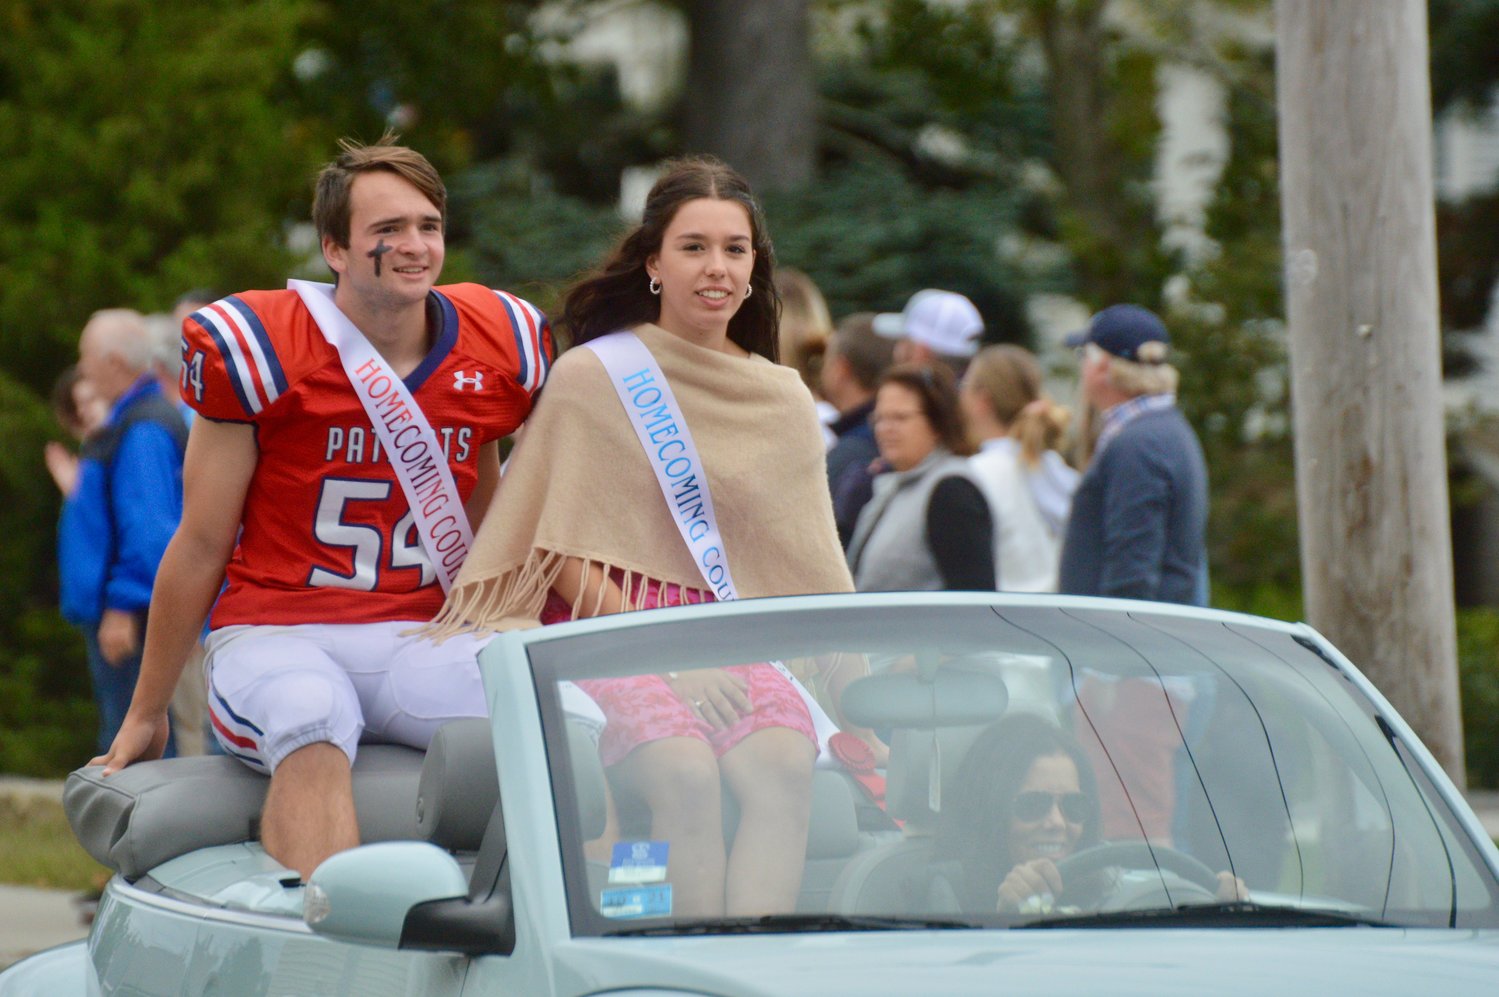 Will McKinnon and Mia Bartlett of the Homecoming court greet spectators during the parade.